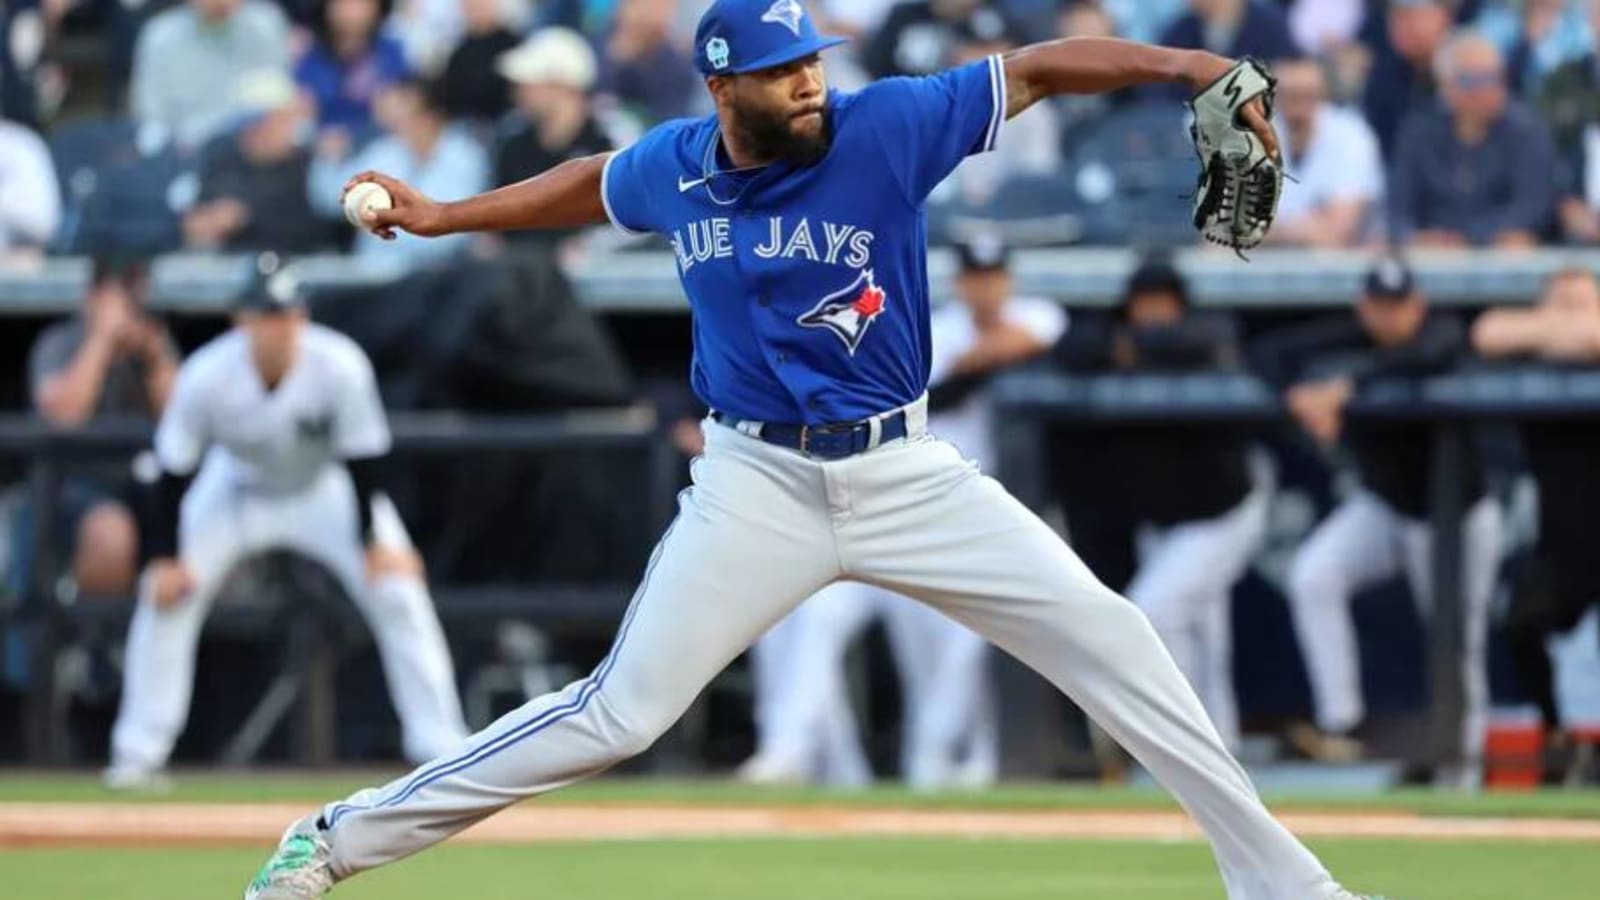 Understanding the contract that Jay Jackson signed with the Blue Jays